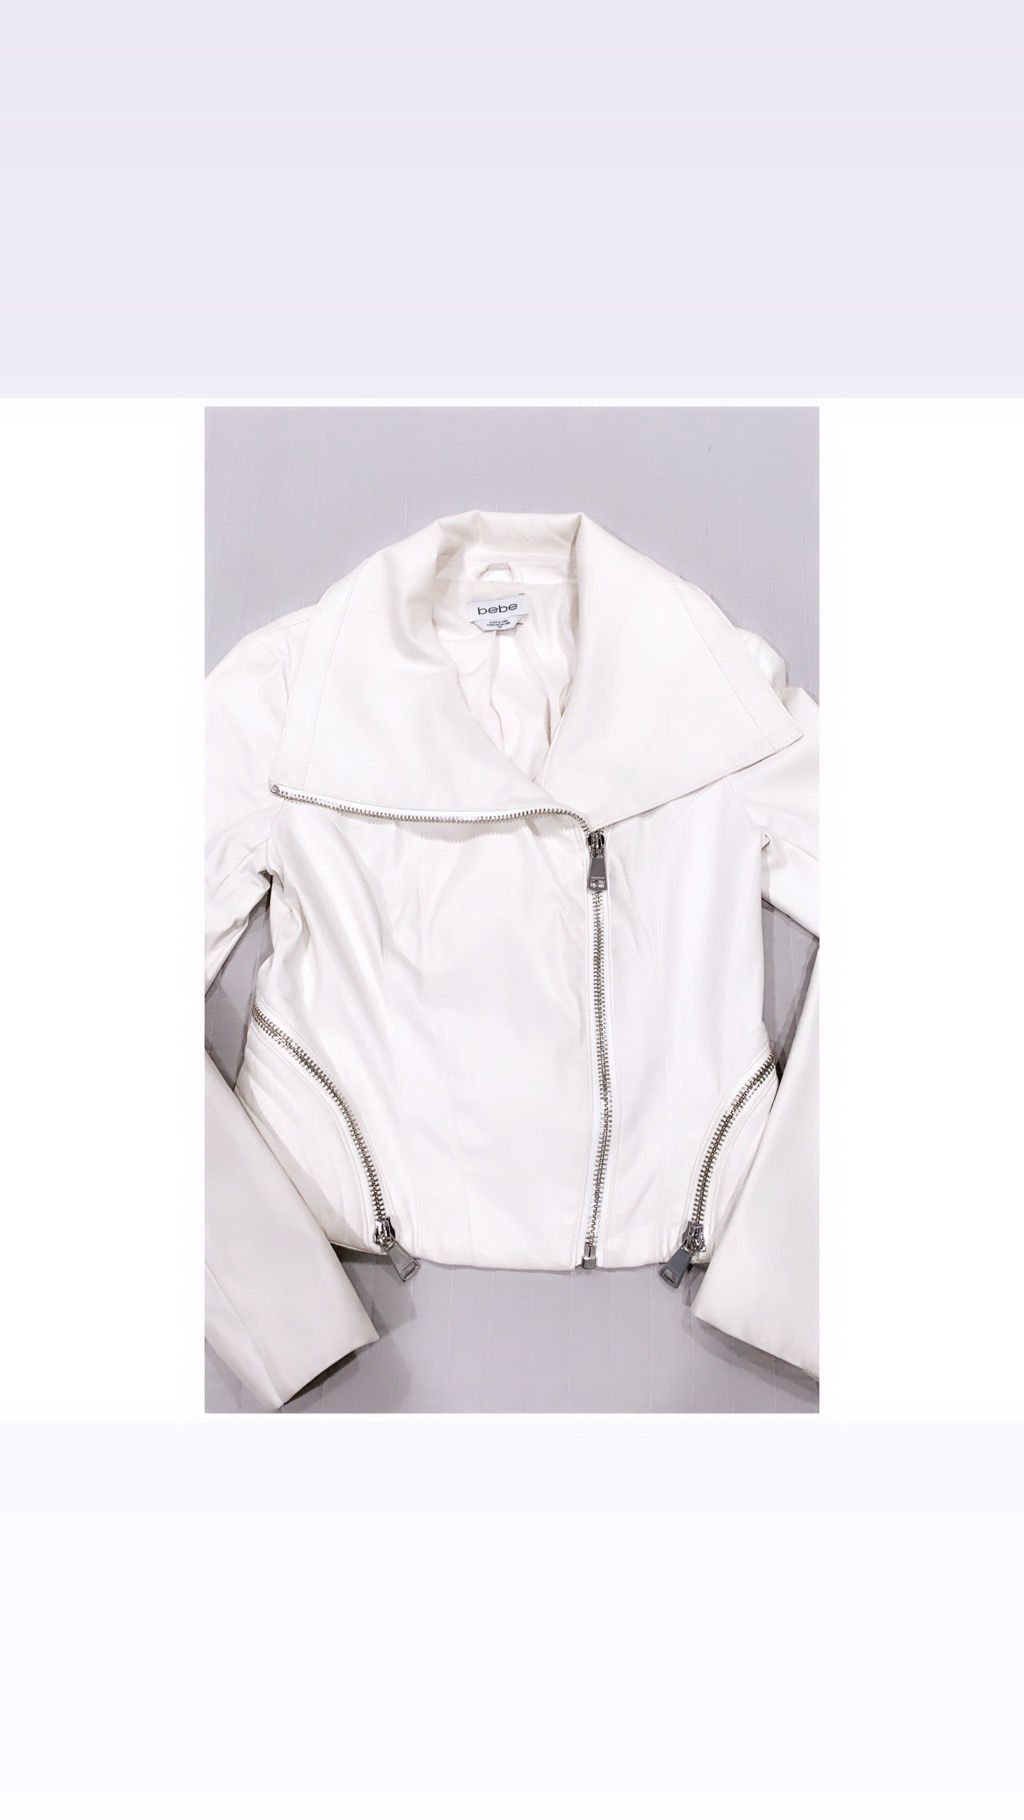 BEBE CHIC CLASSIC OFF-WHITE MOTO JACKET! Excellent condition! Size:S